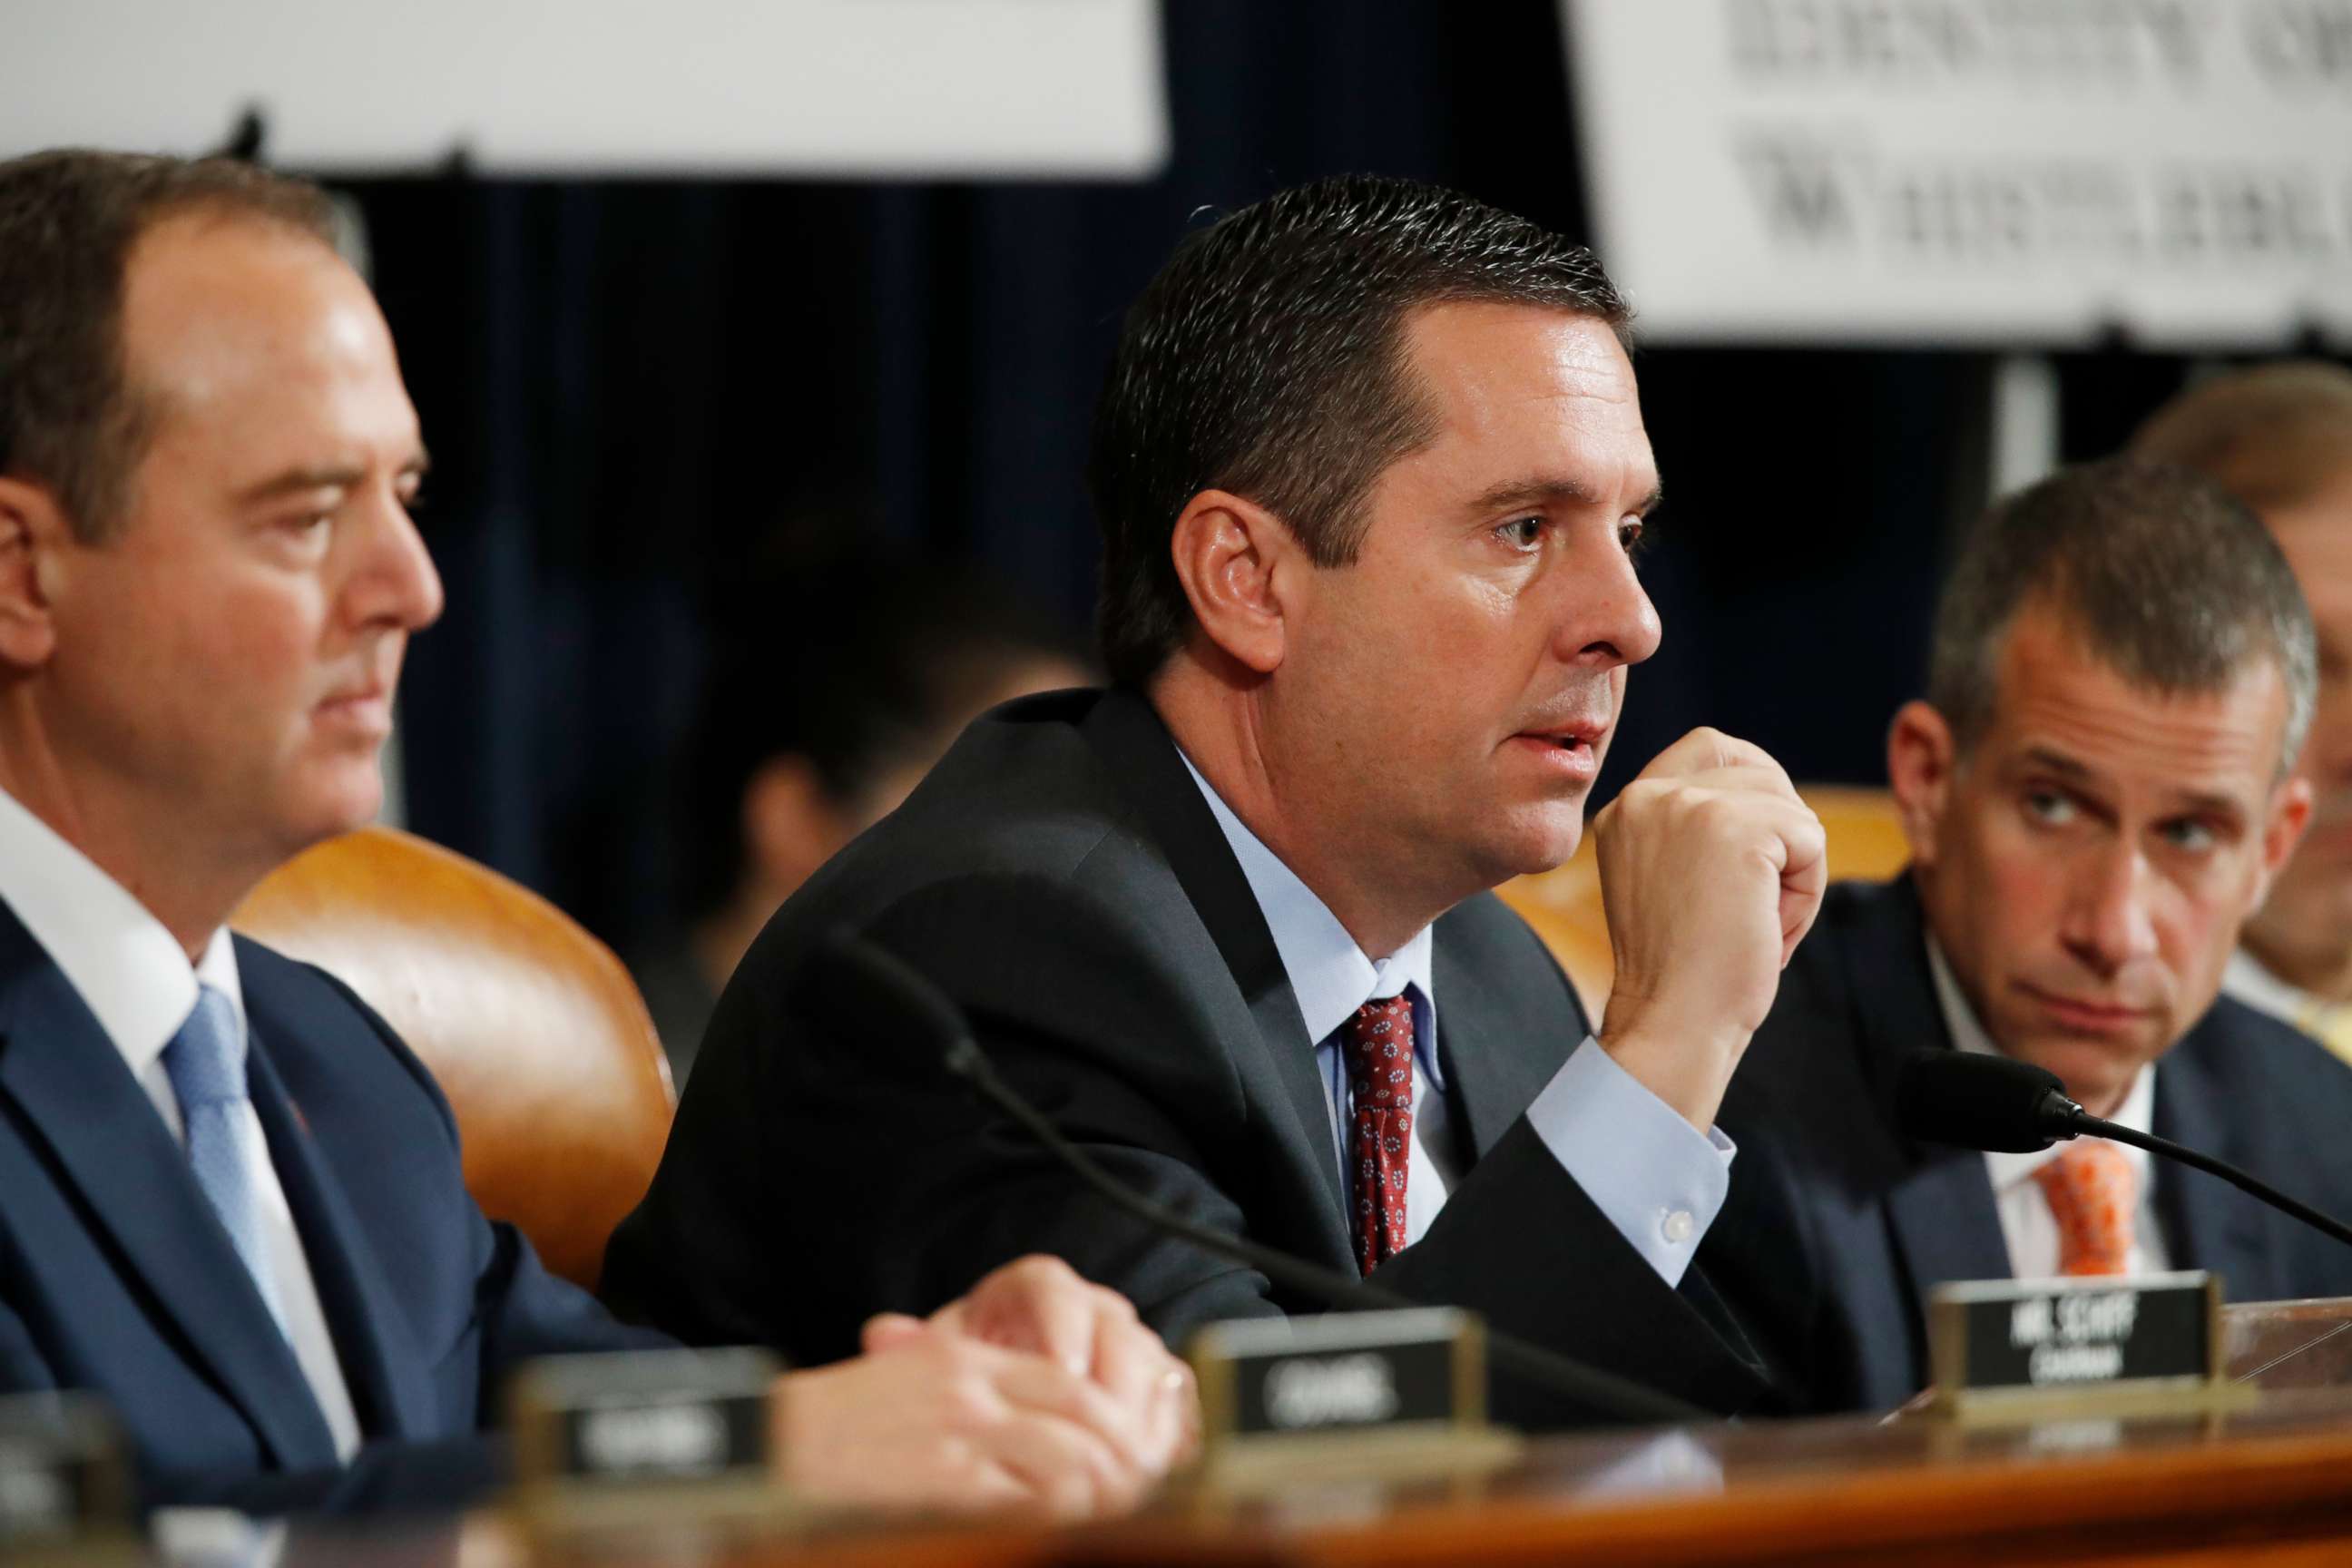 PHOTO: Ranking member Rep. Devin Nunes asks a question as former Ambassador to Ukraine Marie Yovanovitch testifies before the House Intelligence Committee on Capitol Hill in Washington, Nov. 15, 2019.